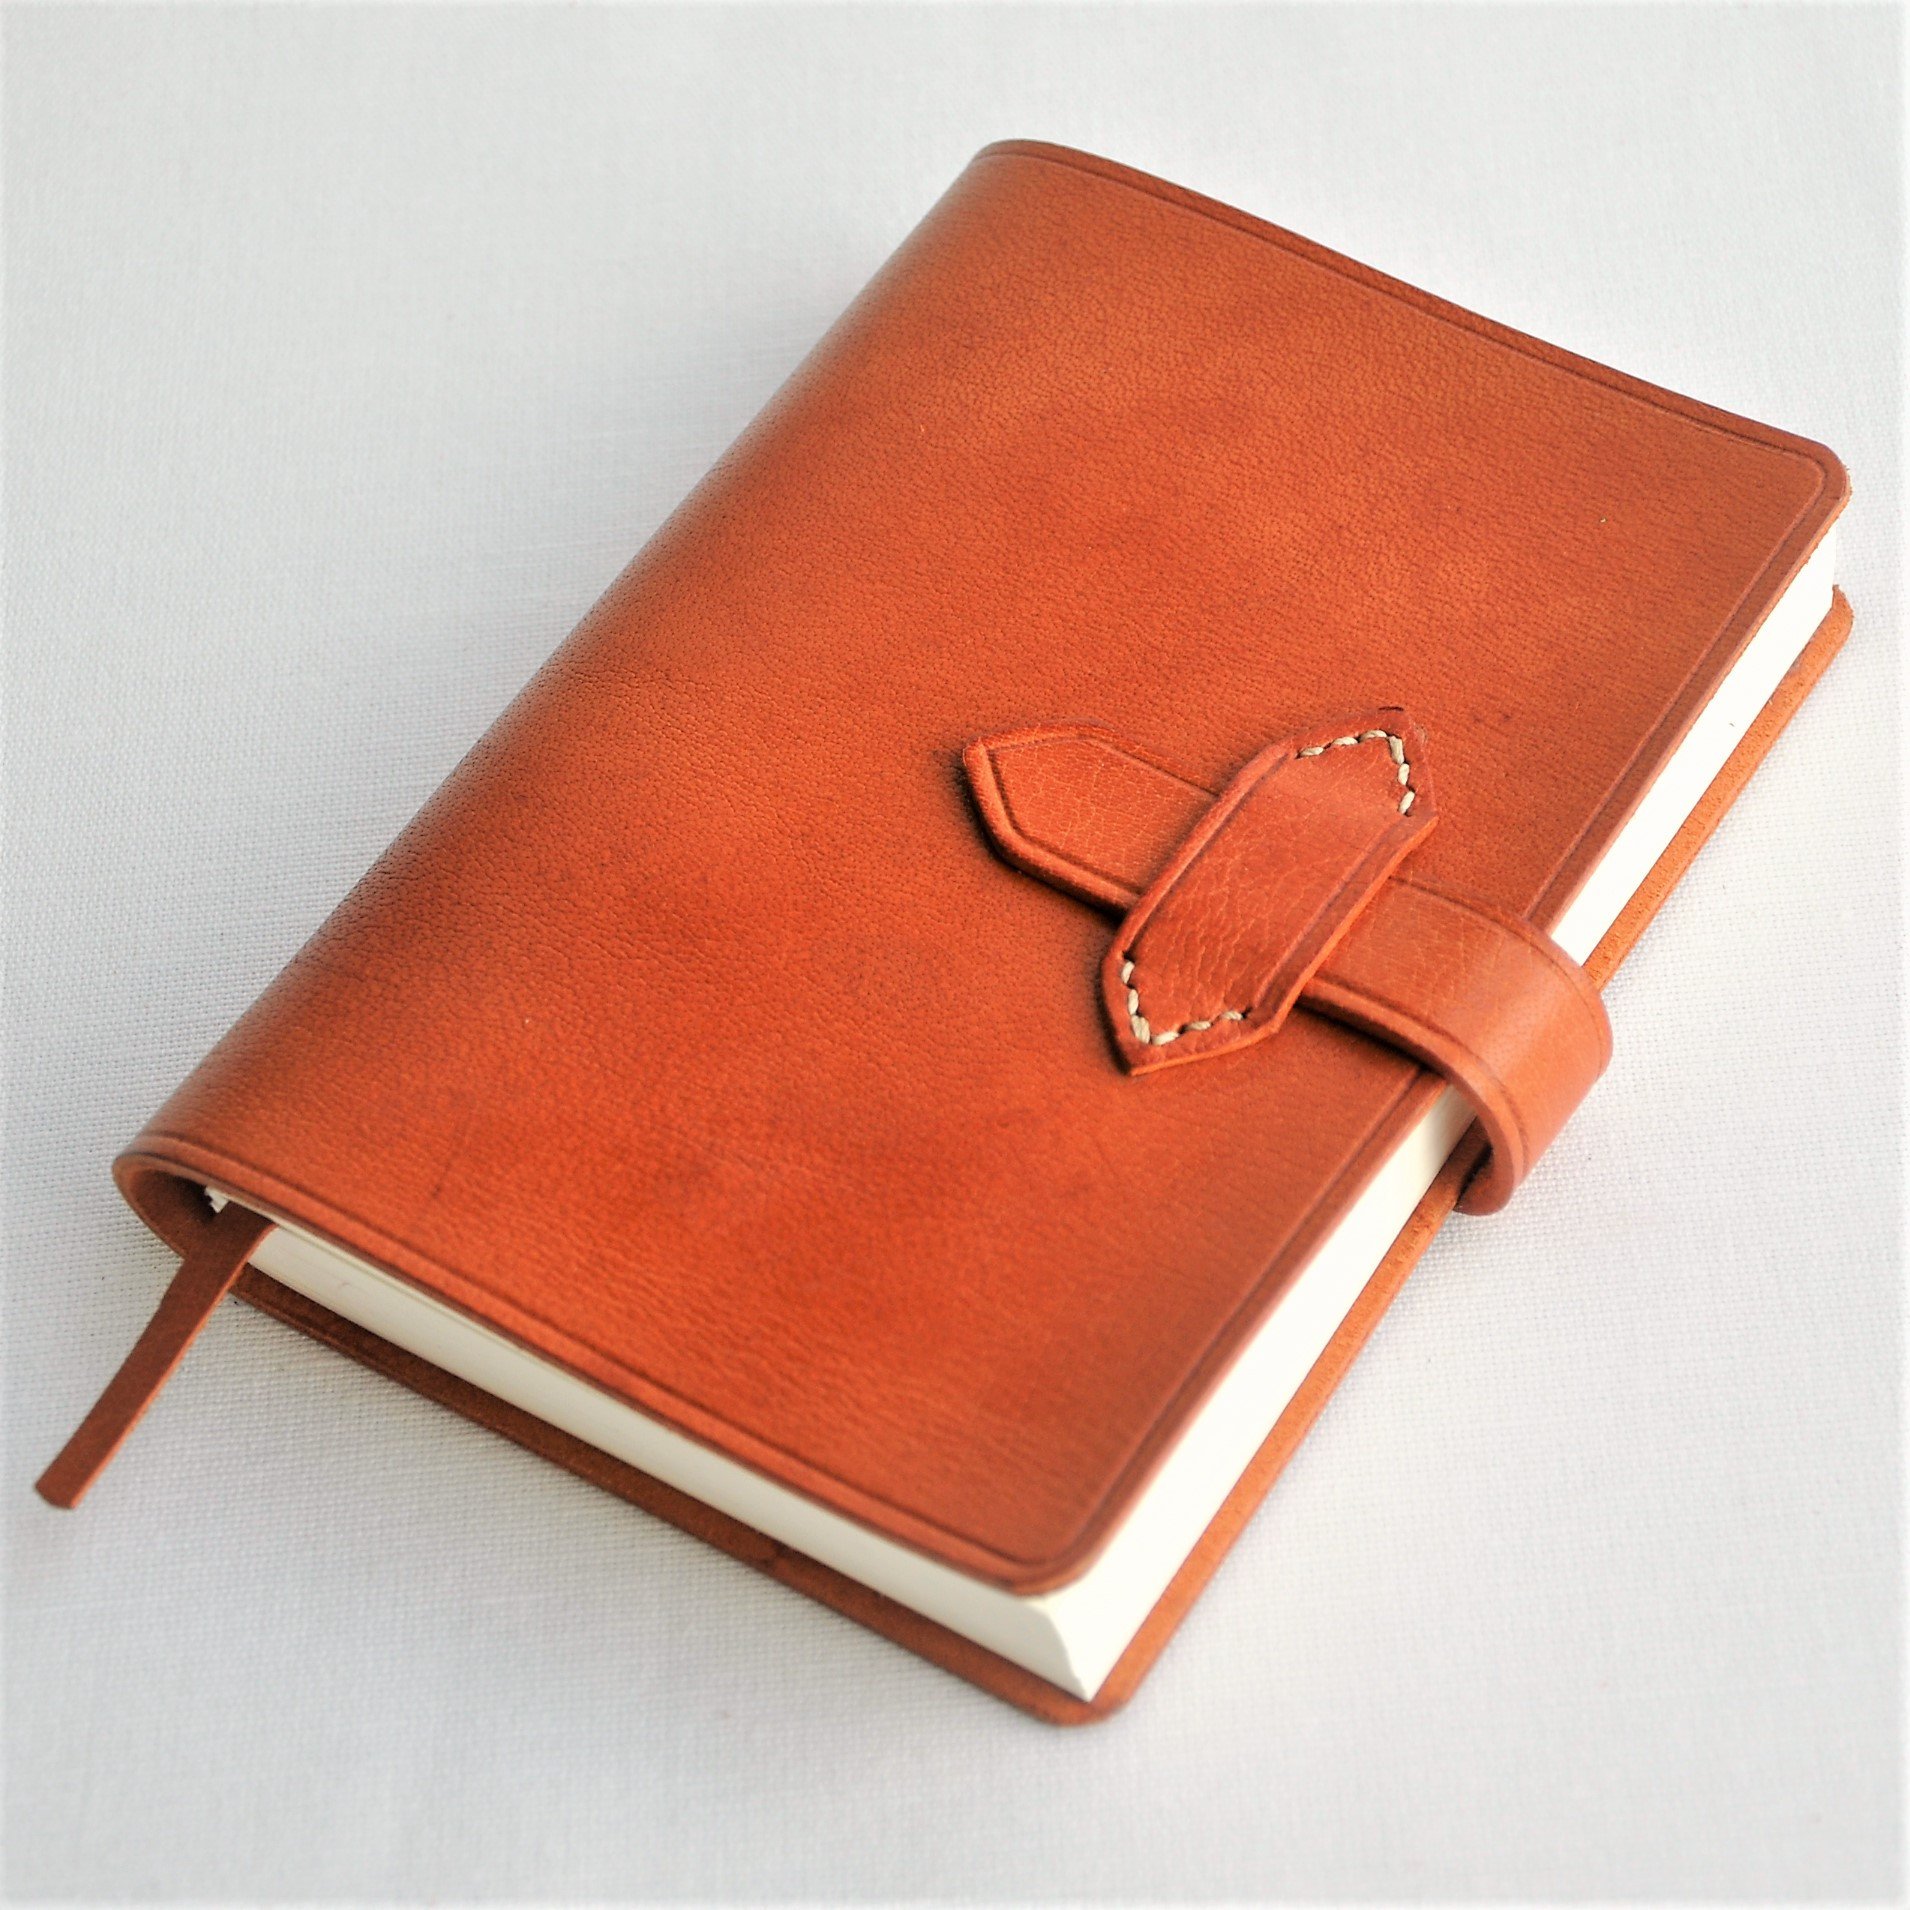 leather sketchpad